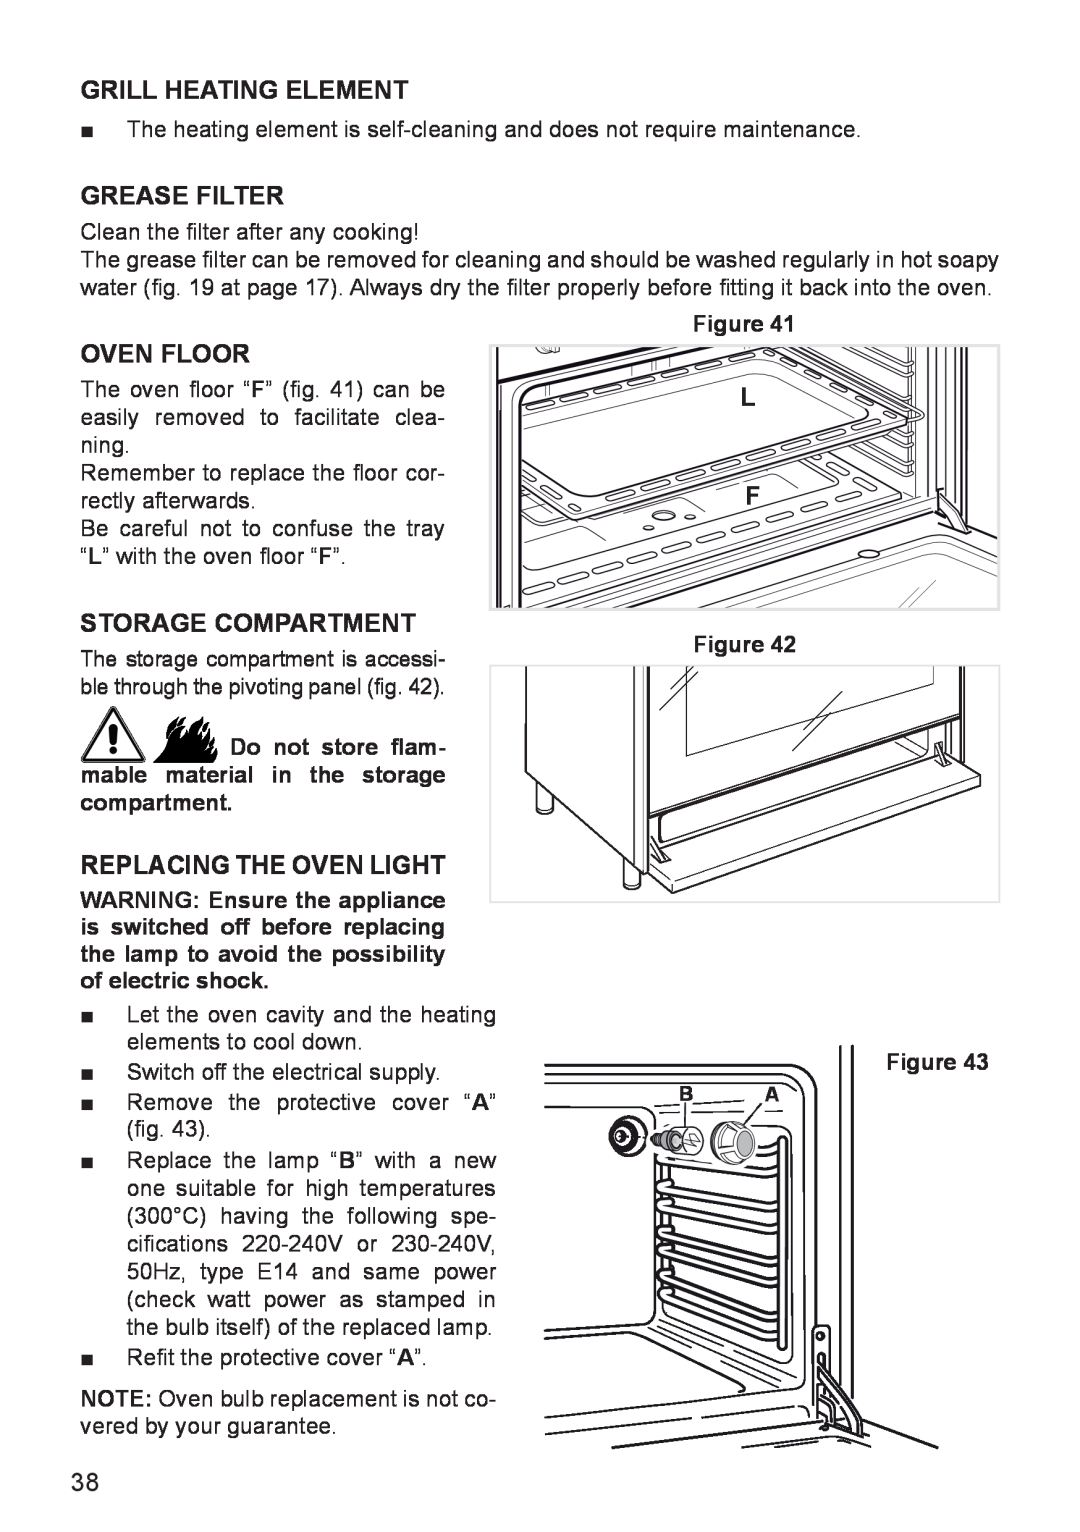 DeLonghi DEF905E manual Grill Heating Element, Grease Filter, Oven Floor, Storage Compartment, Replacing The Oven Light 